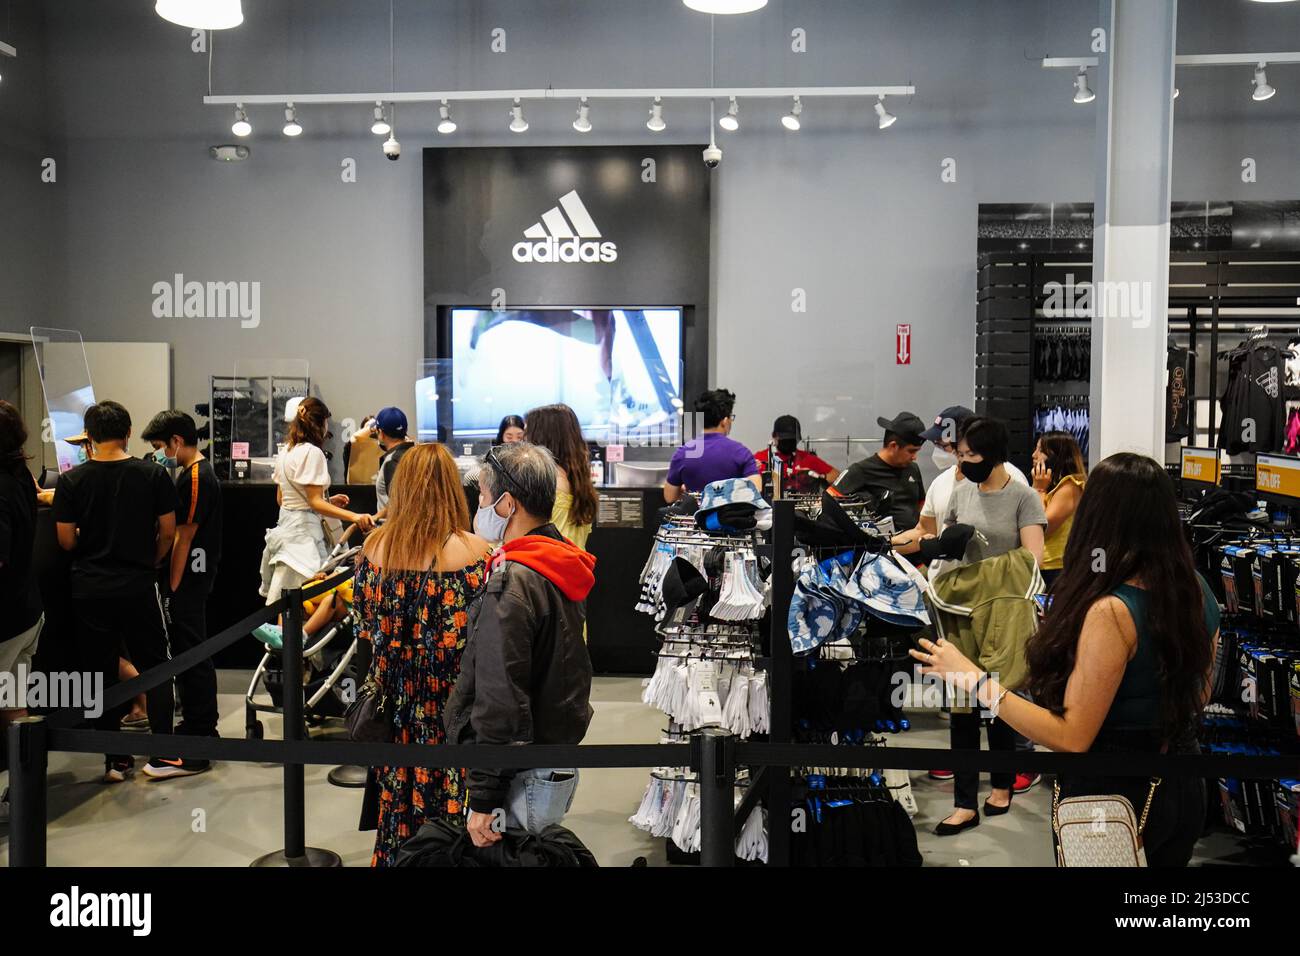 Orange, USA. 17th Apr, 2022. People seen shopping inside an Adidas store at The Outlets in Orange. Many people at The Outlets in Orange, for clothes, watches, bags, and backpacks